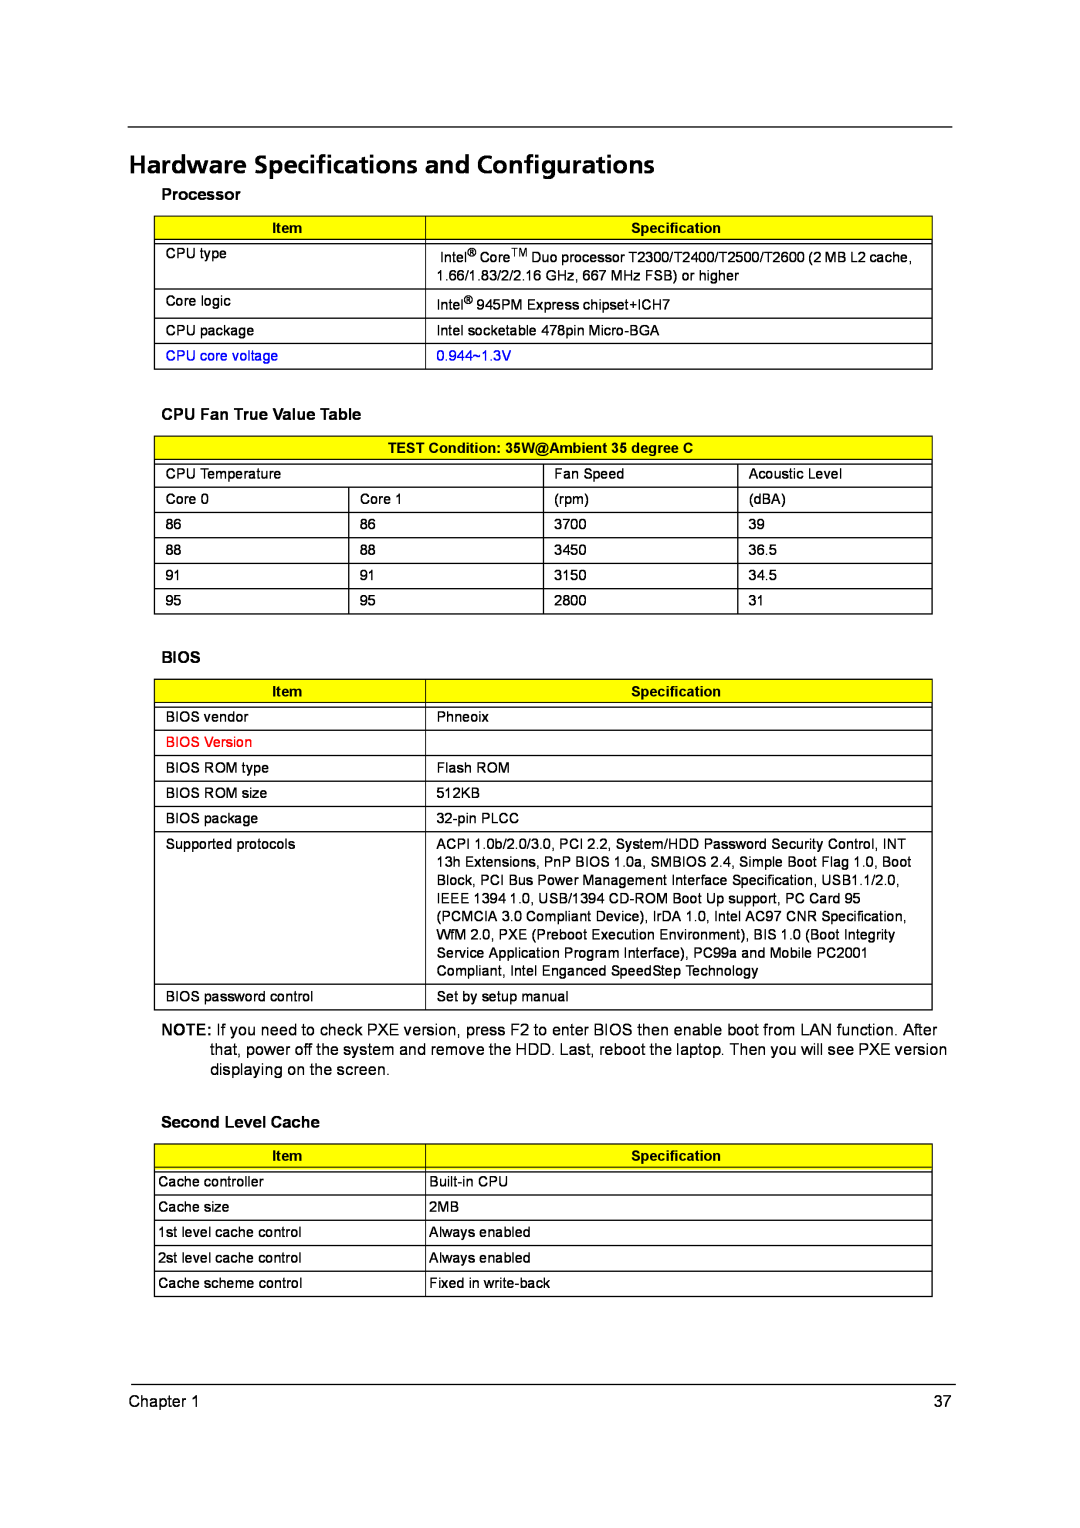 Acer 9800 manual Hardware Specifications and Configurations, Processor, CPU Fan True Value Table, Bios, Second Level Cache 